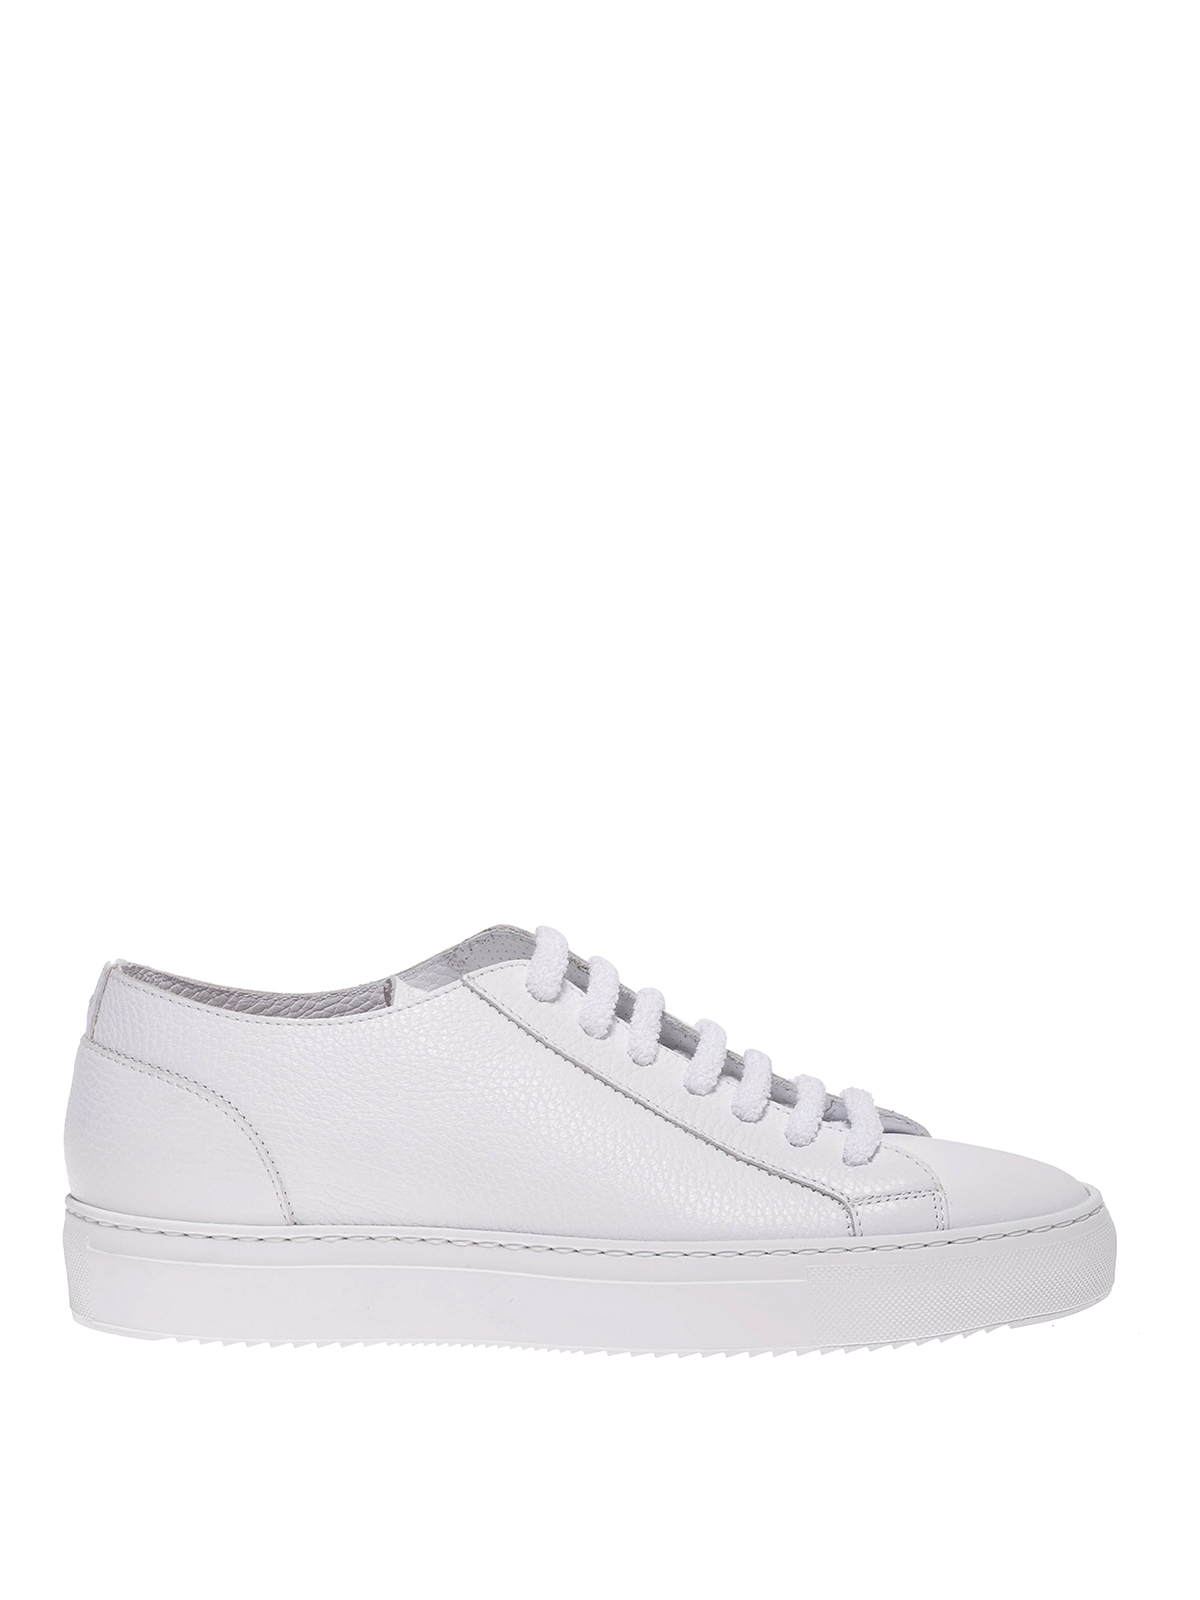 Doucal's Nova Grainy Leather Trainers In White